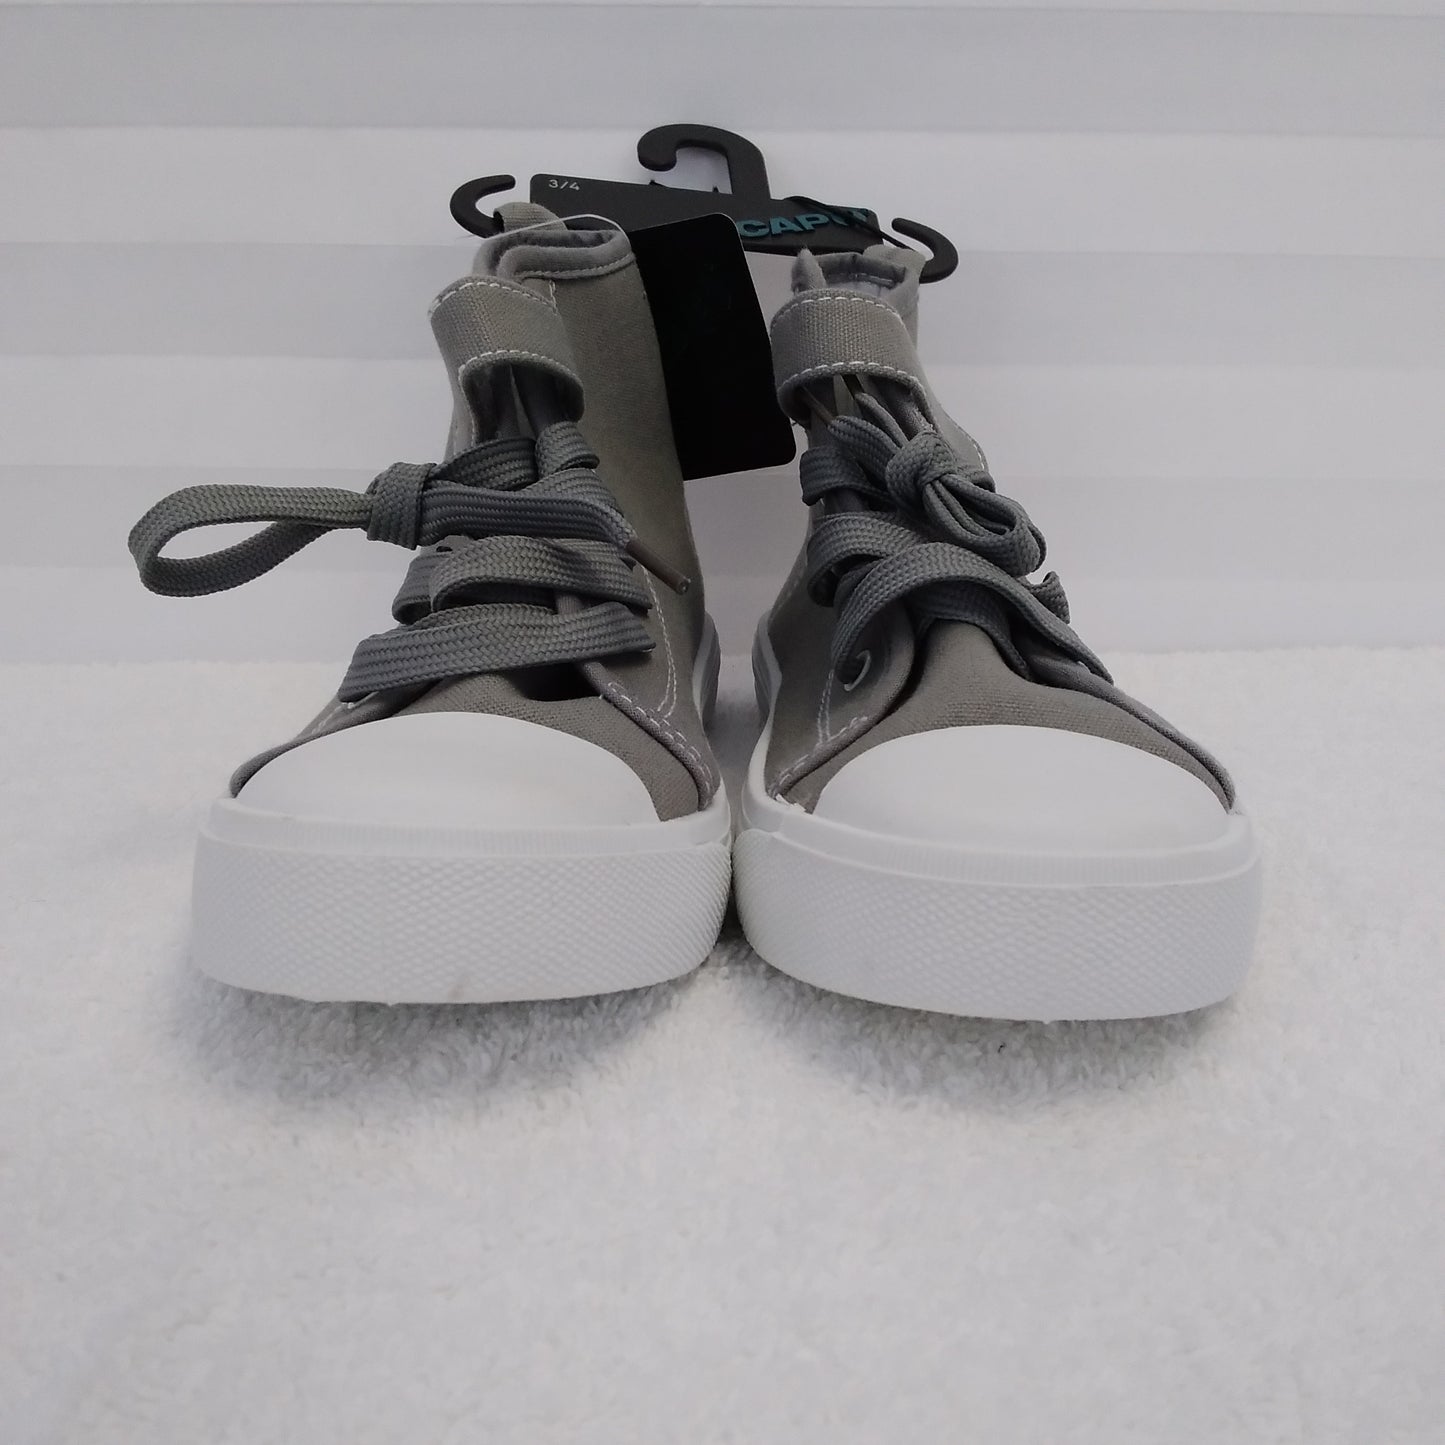 NWT - Capelli Boy's Gray Cap High Top Sneakers - Size: 3/4